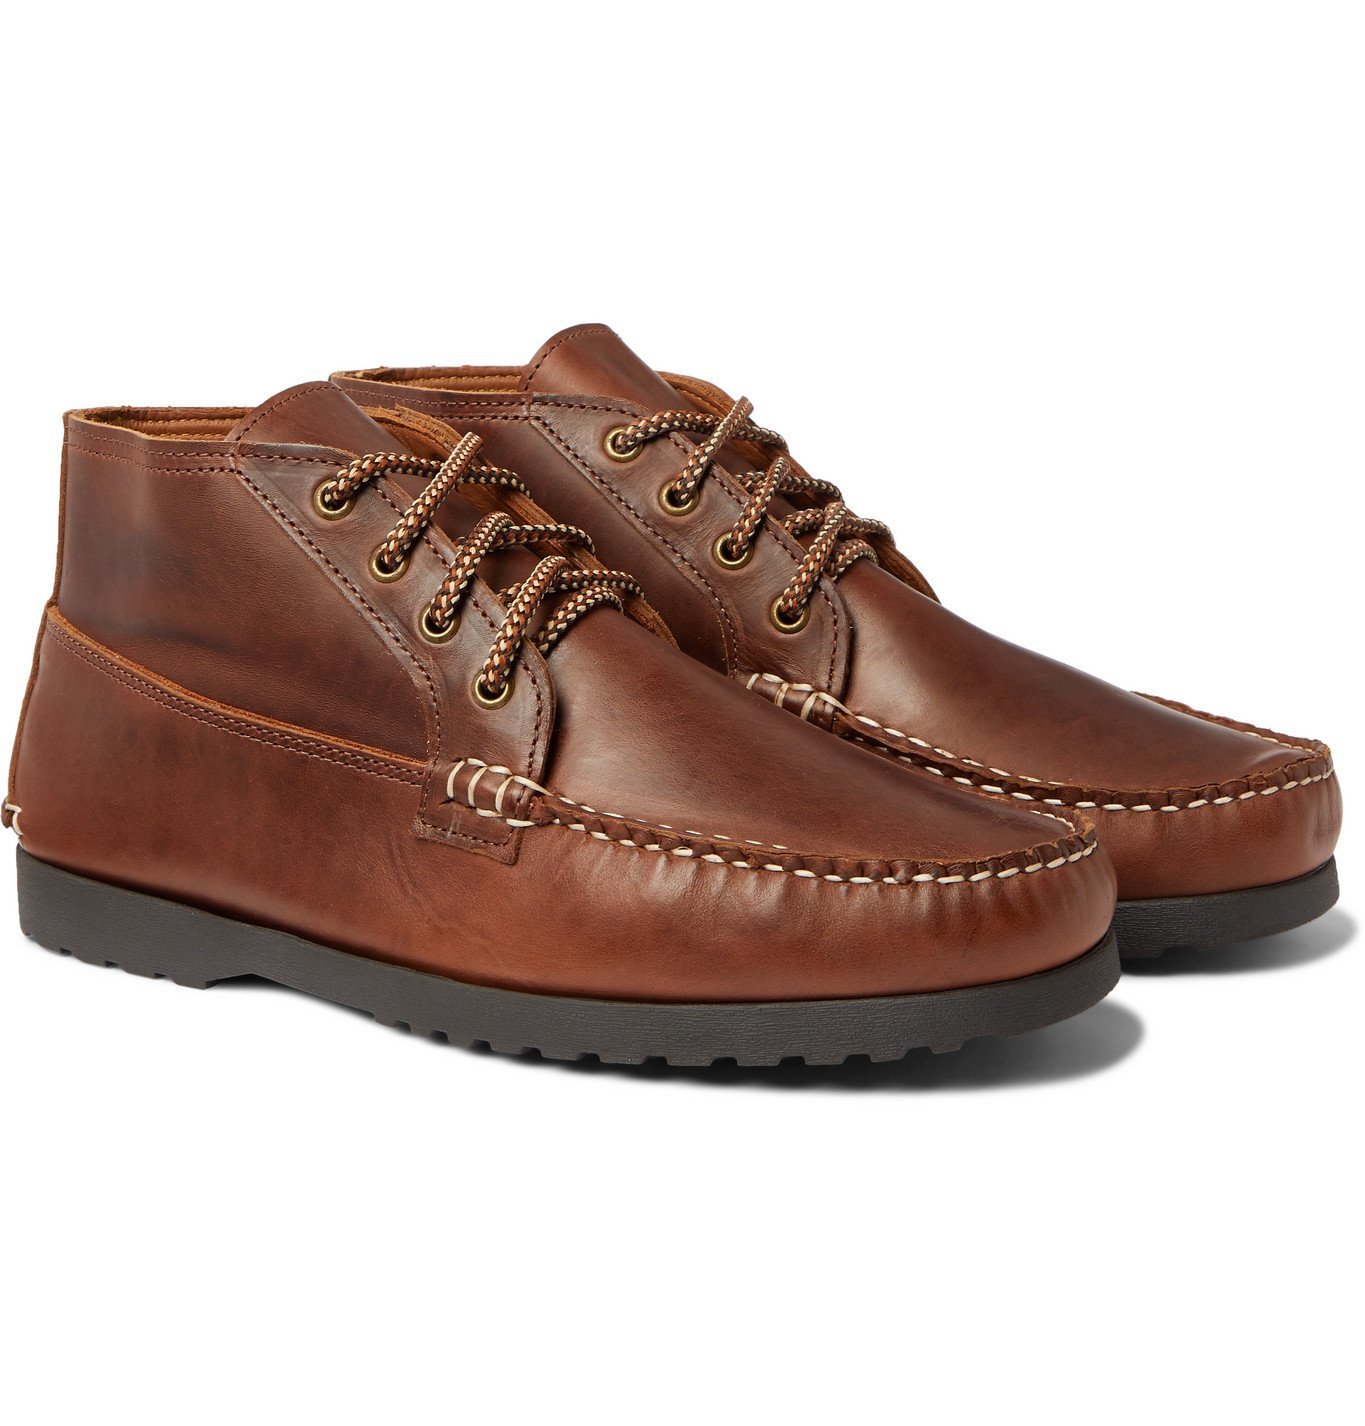 Quoddy - Telos Leather Chukka Boots - Brown Quoddy